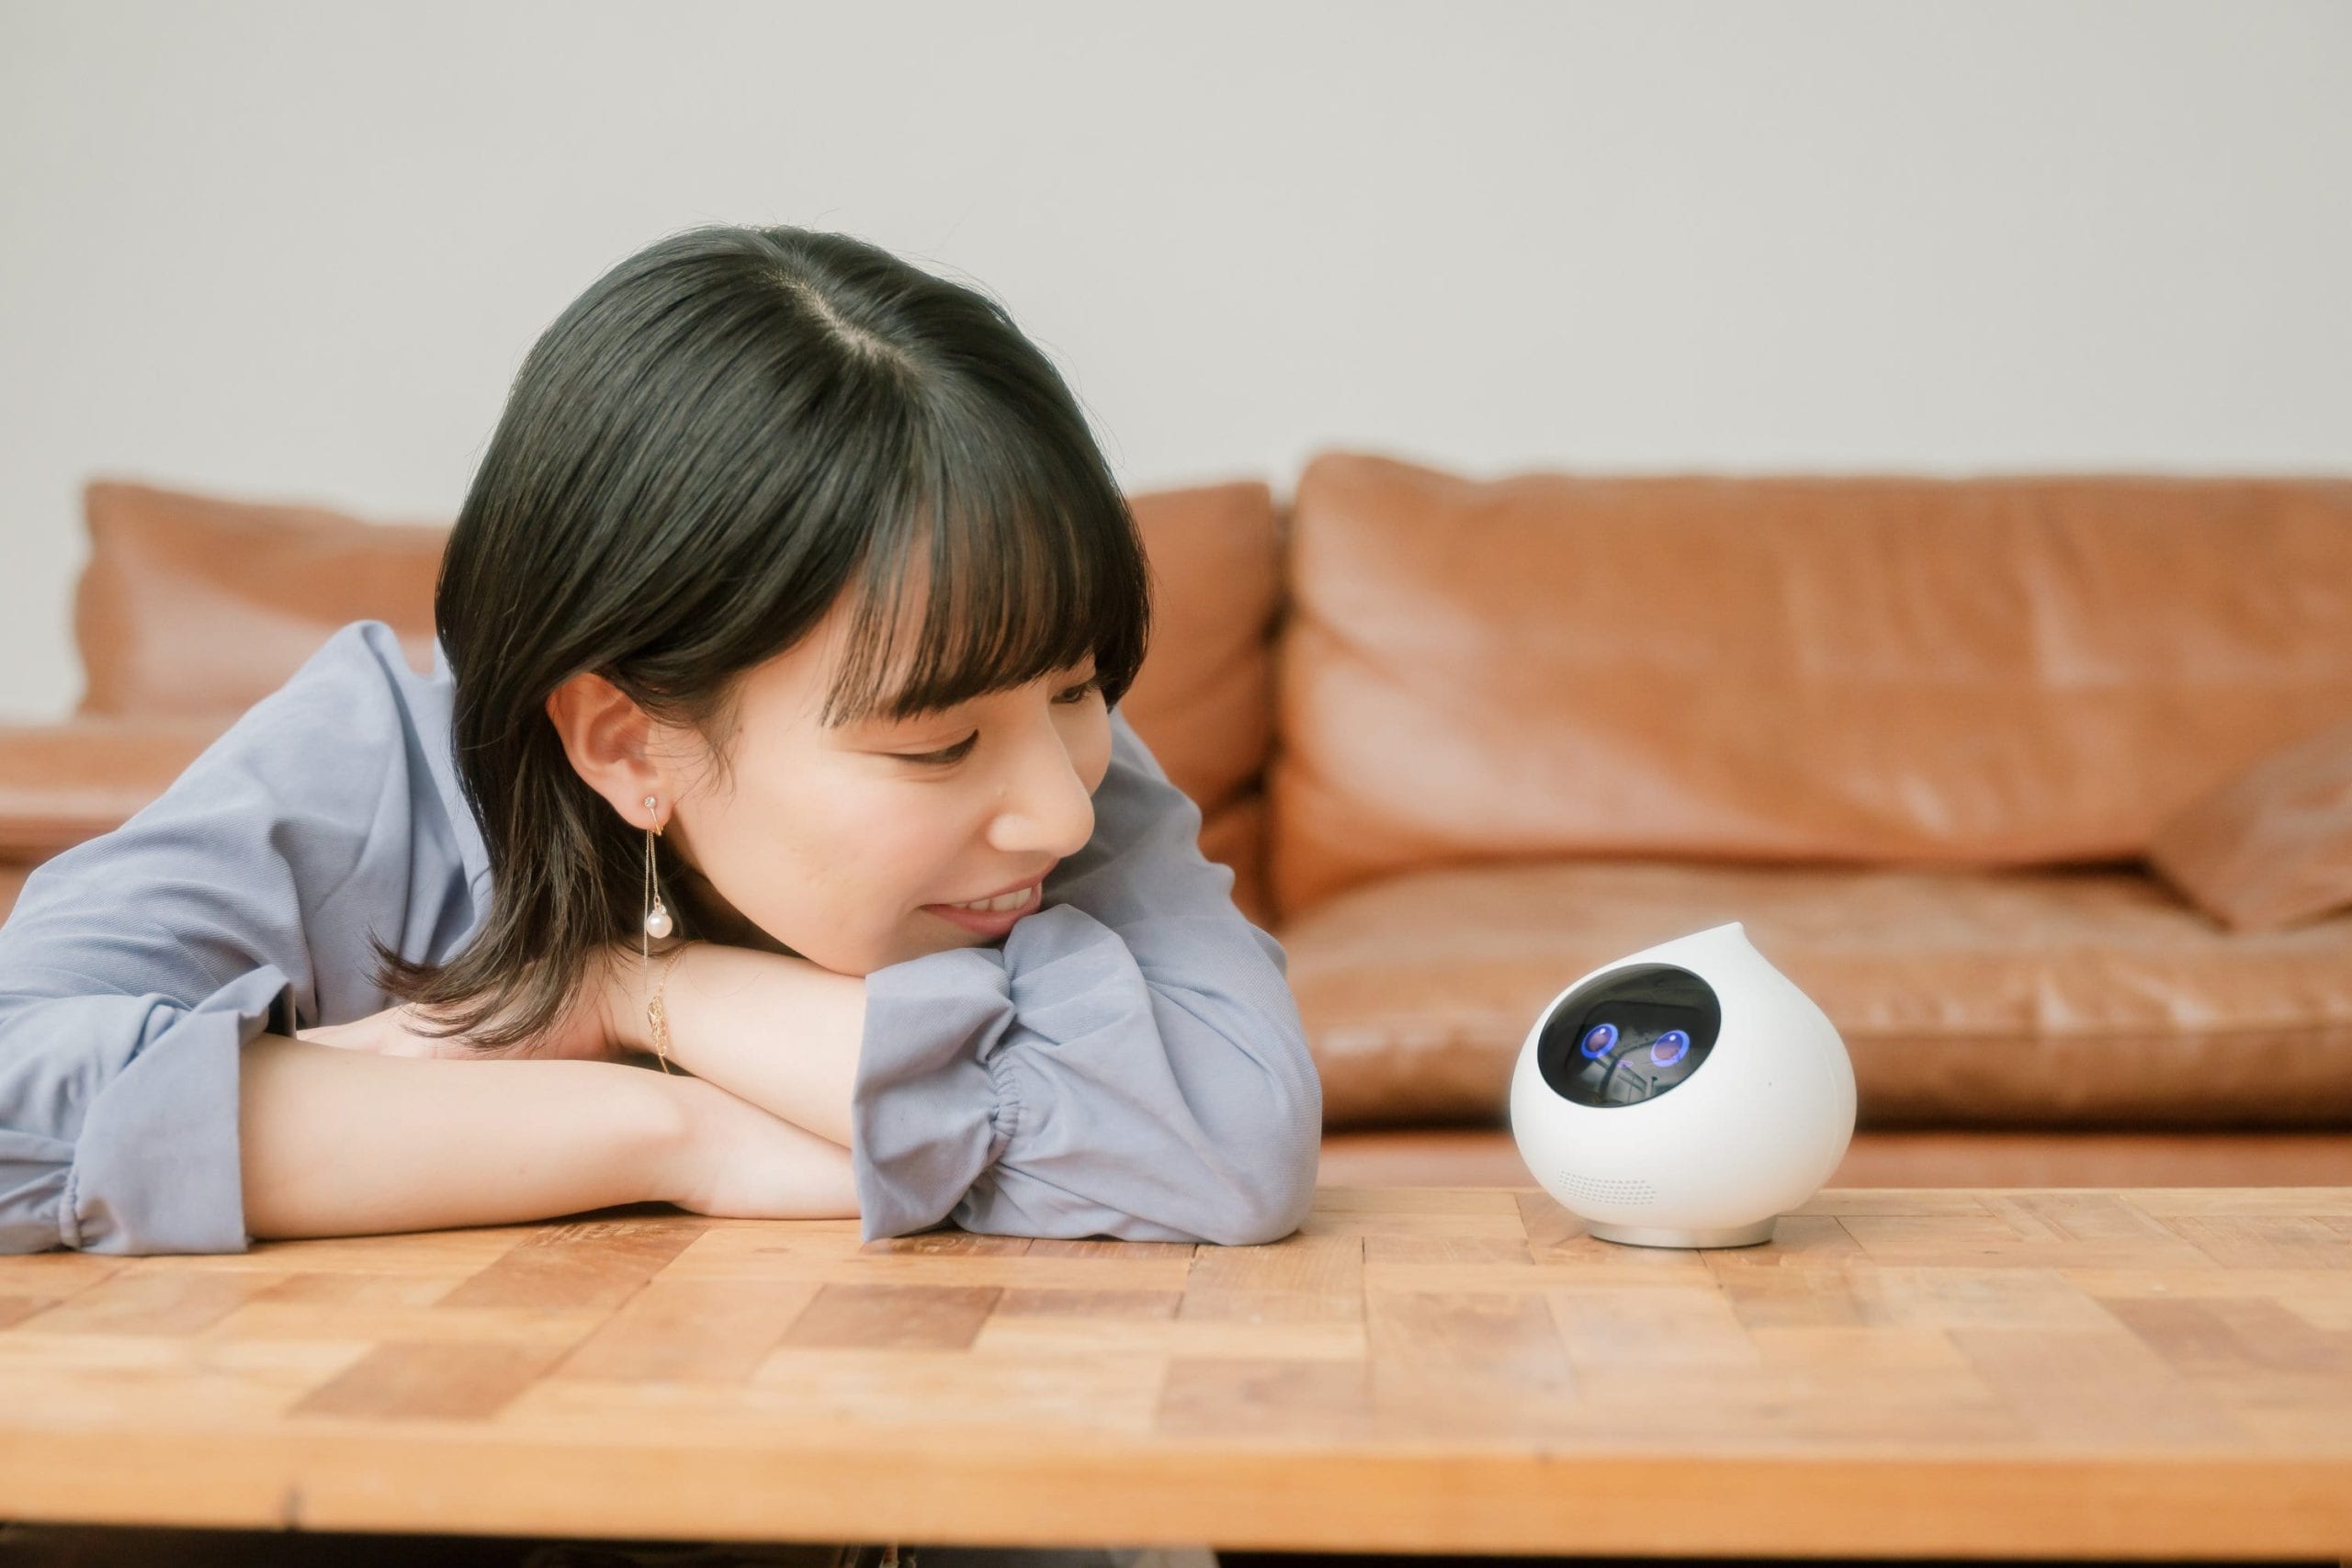 Romi 自律型会話ロボット AIロボット パールピンク ロミィ - その他